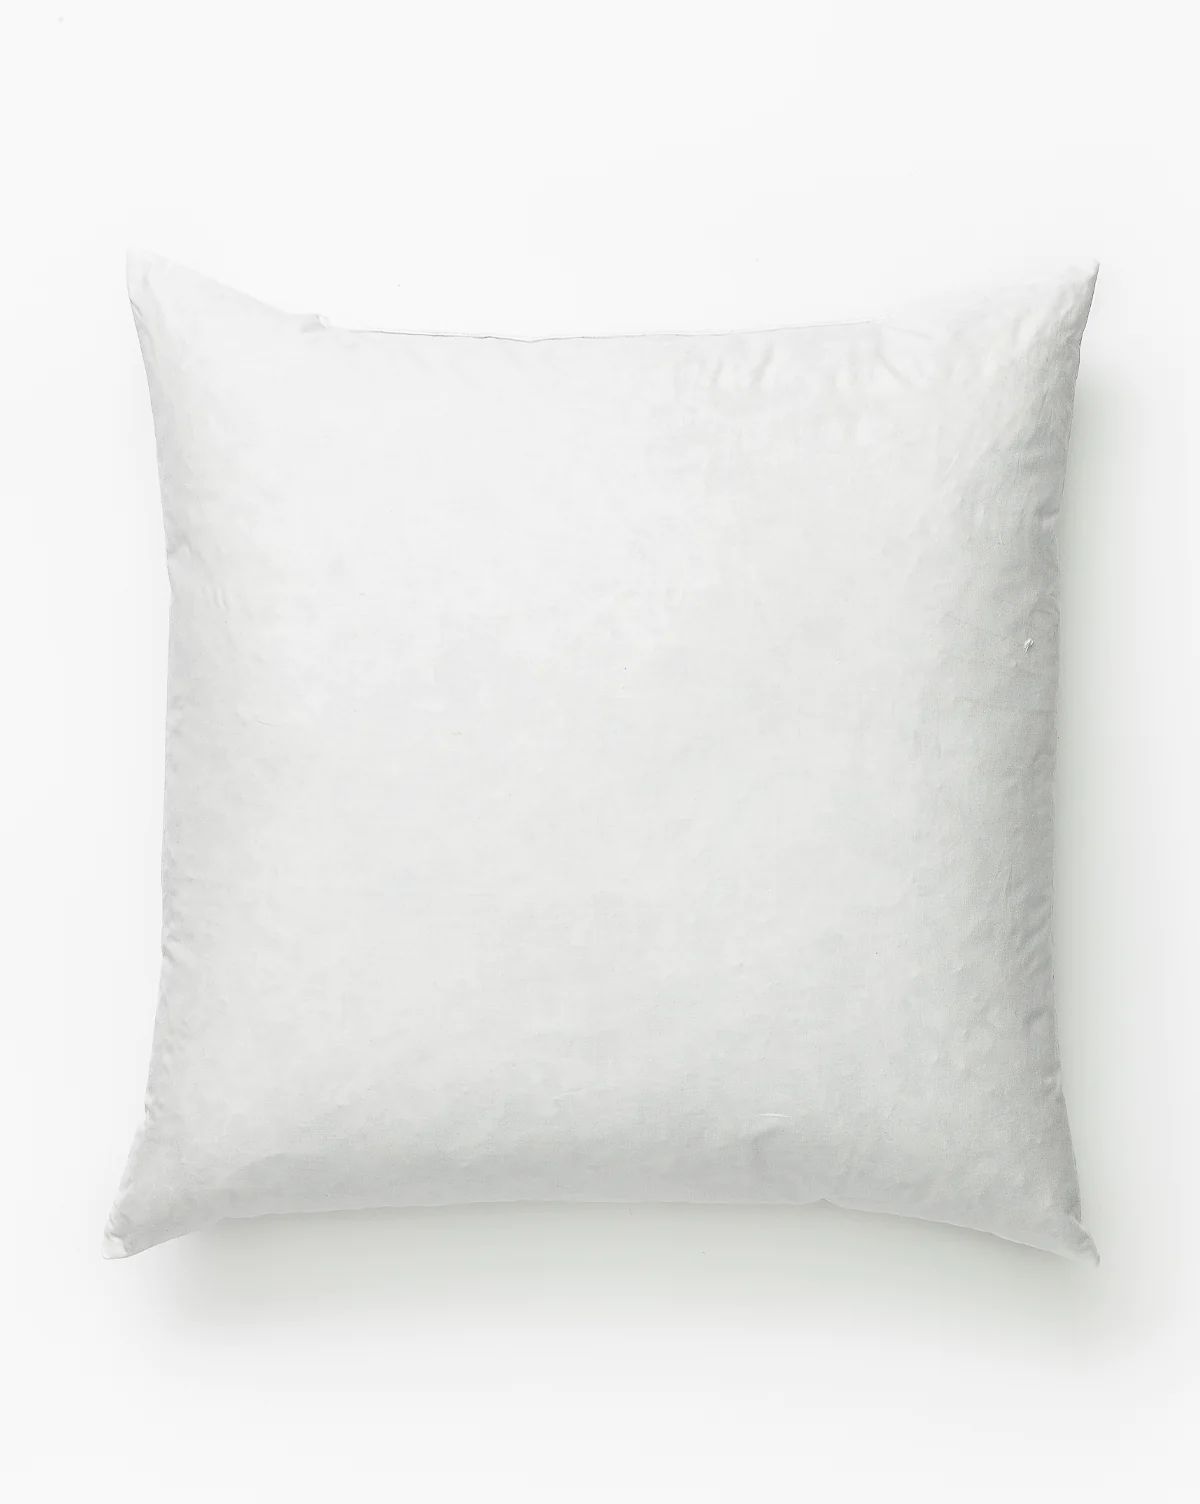 Vintage Blue & White Texture Pillow Cover | McGee & Co.